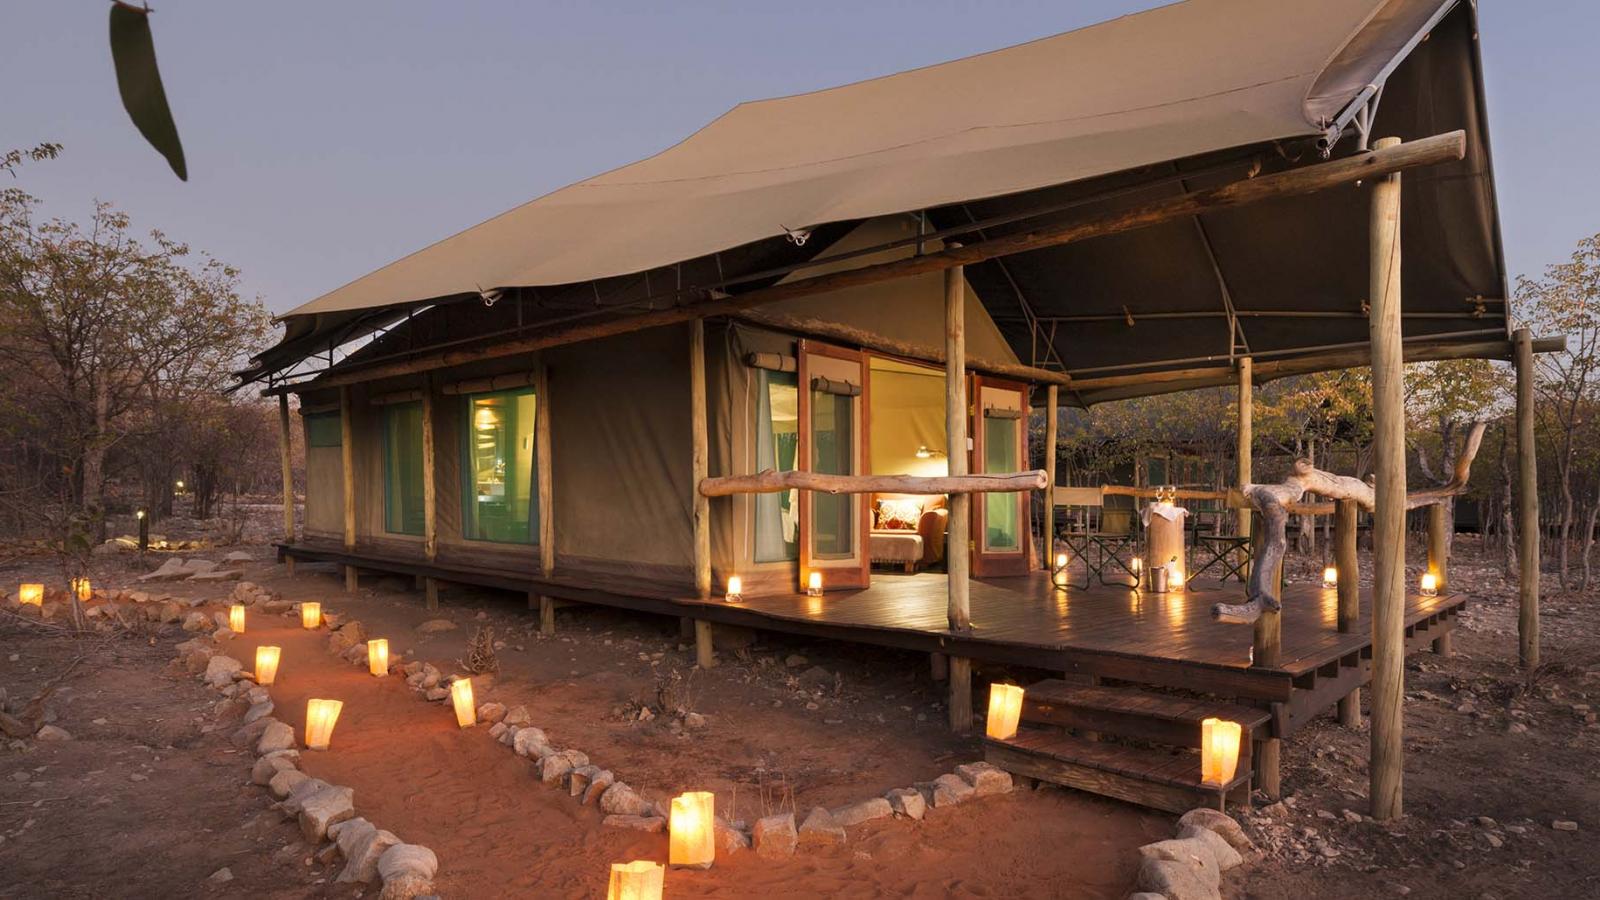 Our Experience At Ongava Tented Camp In Ongava Game Reserve, Namibia